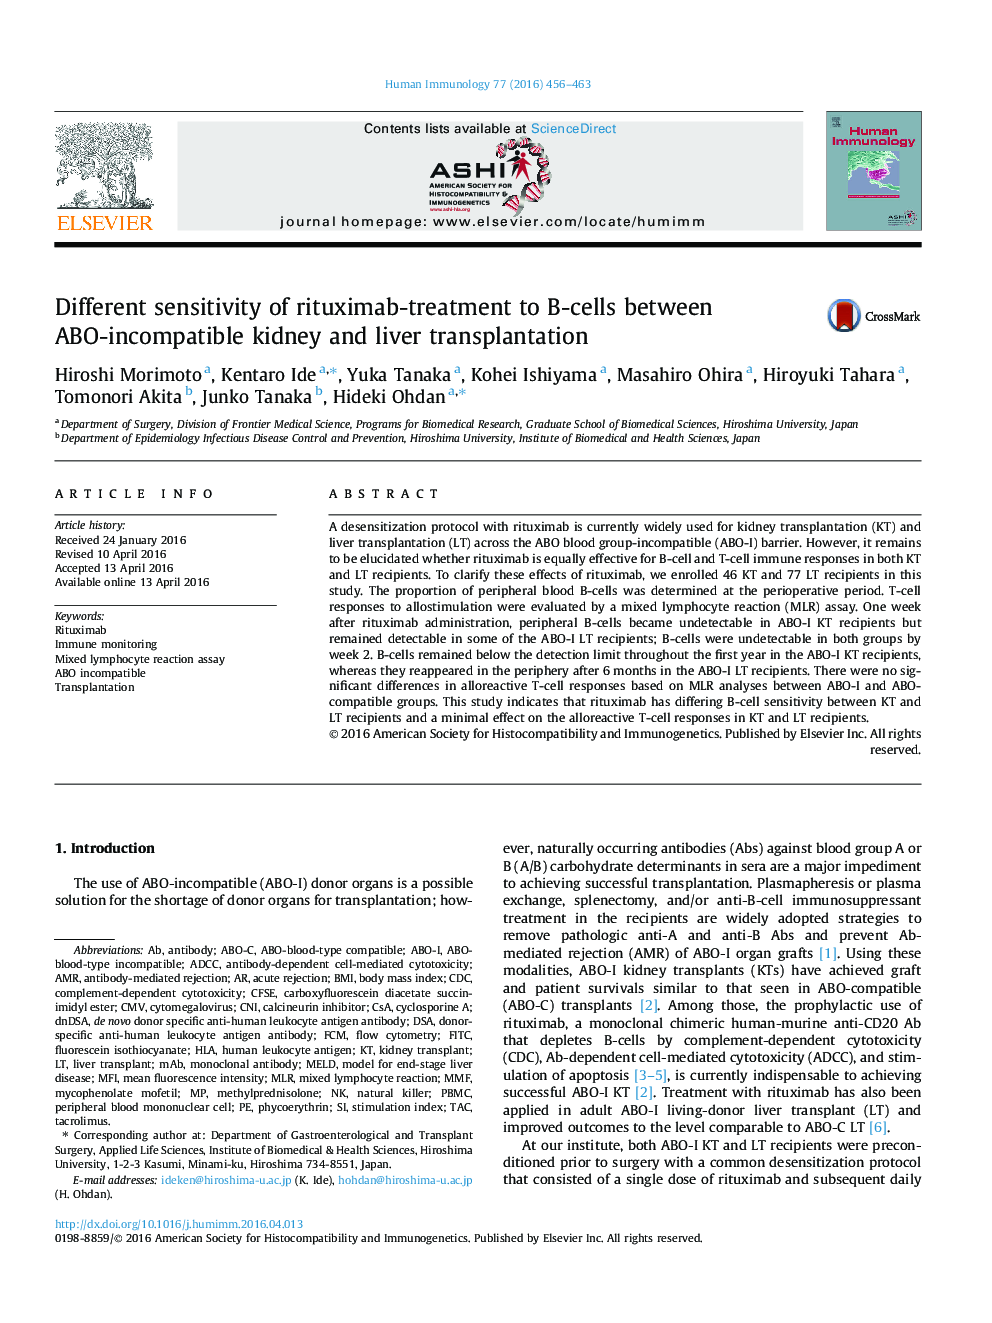 Different sensitivity of rituximab-treatment to B-cells between ABO-incompatible kidney and liver transplantation